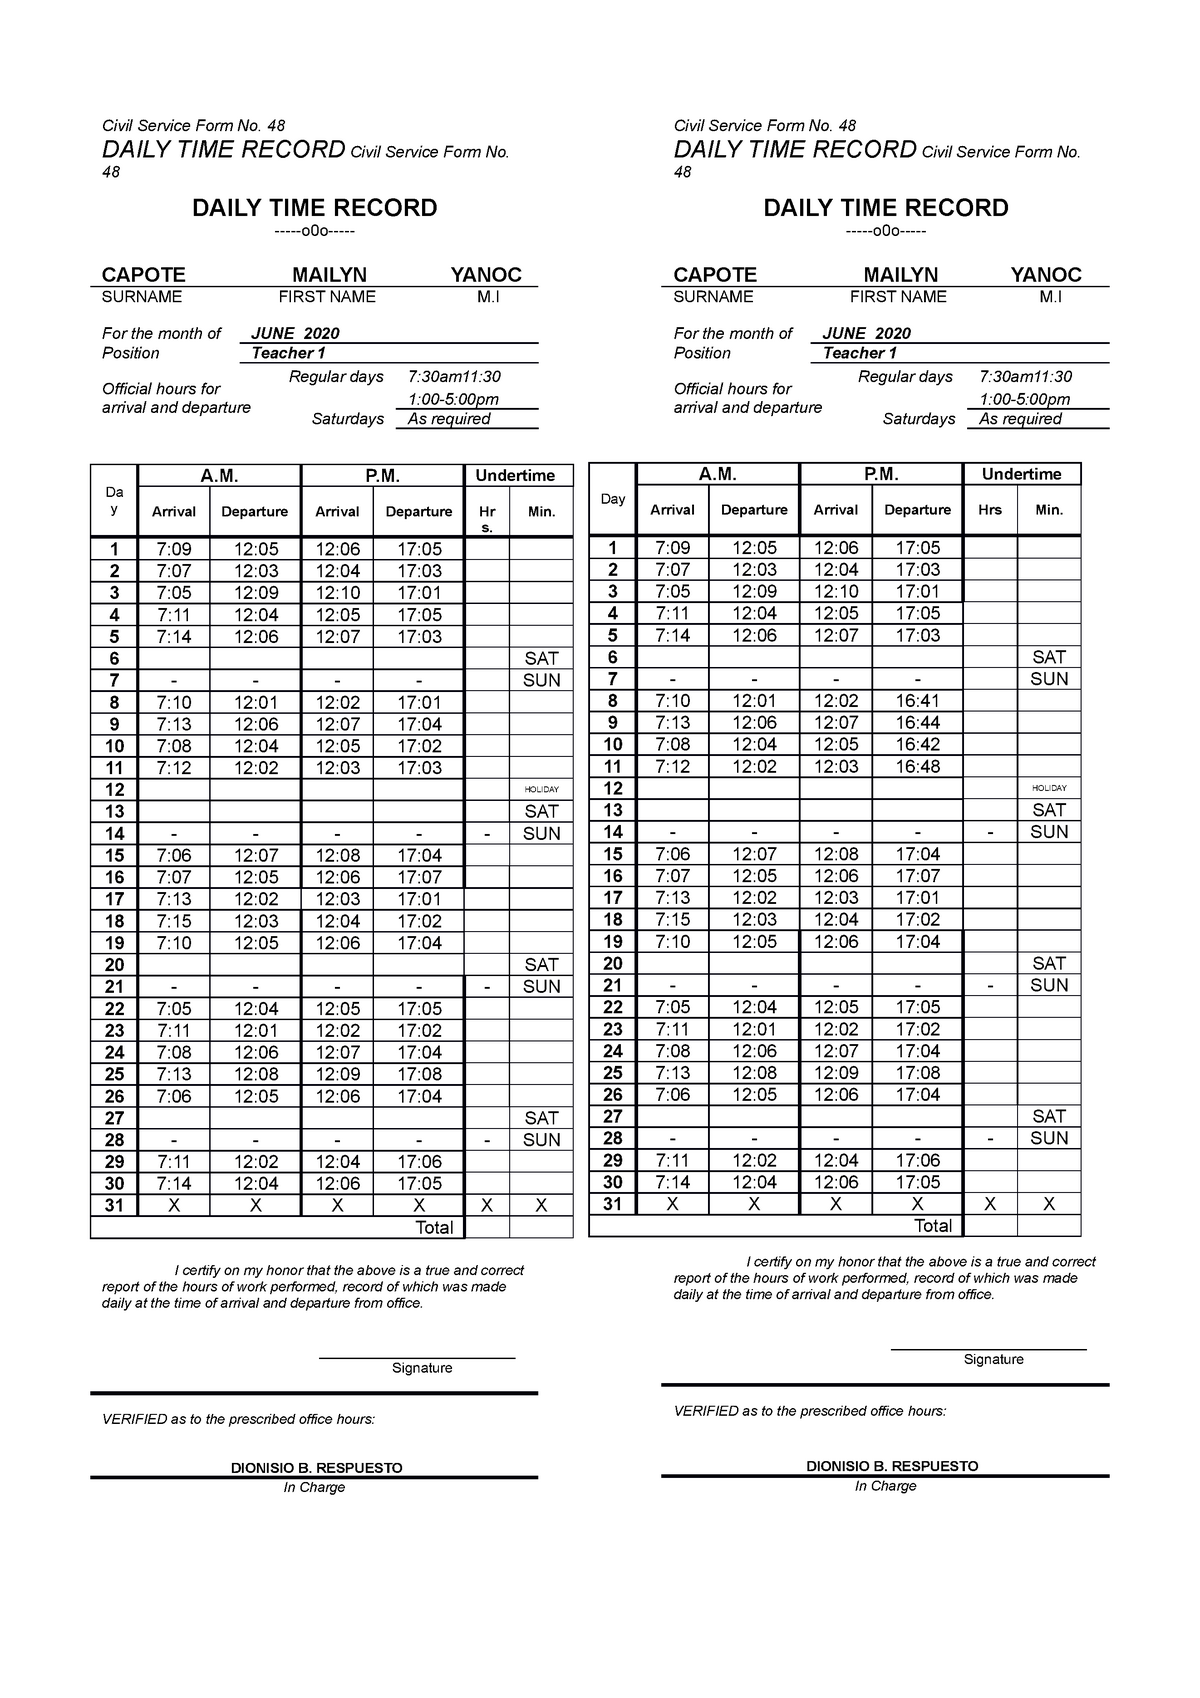 FORM48DTR posted Civil Service Form No. 48 DAILY TIME RECORD